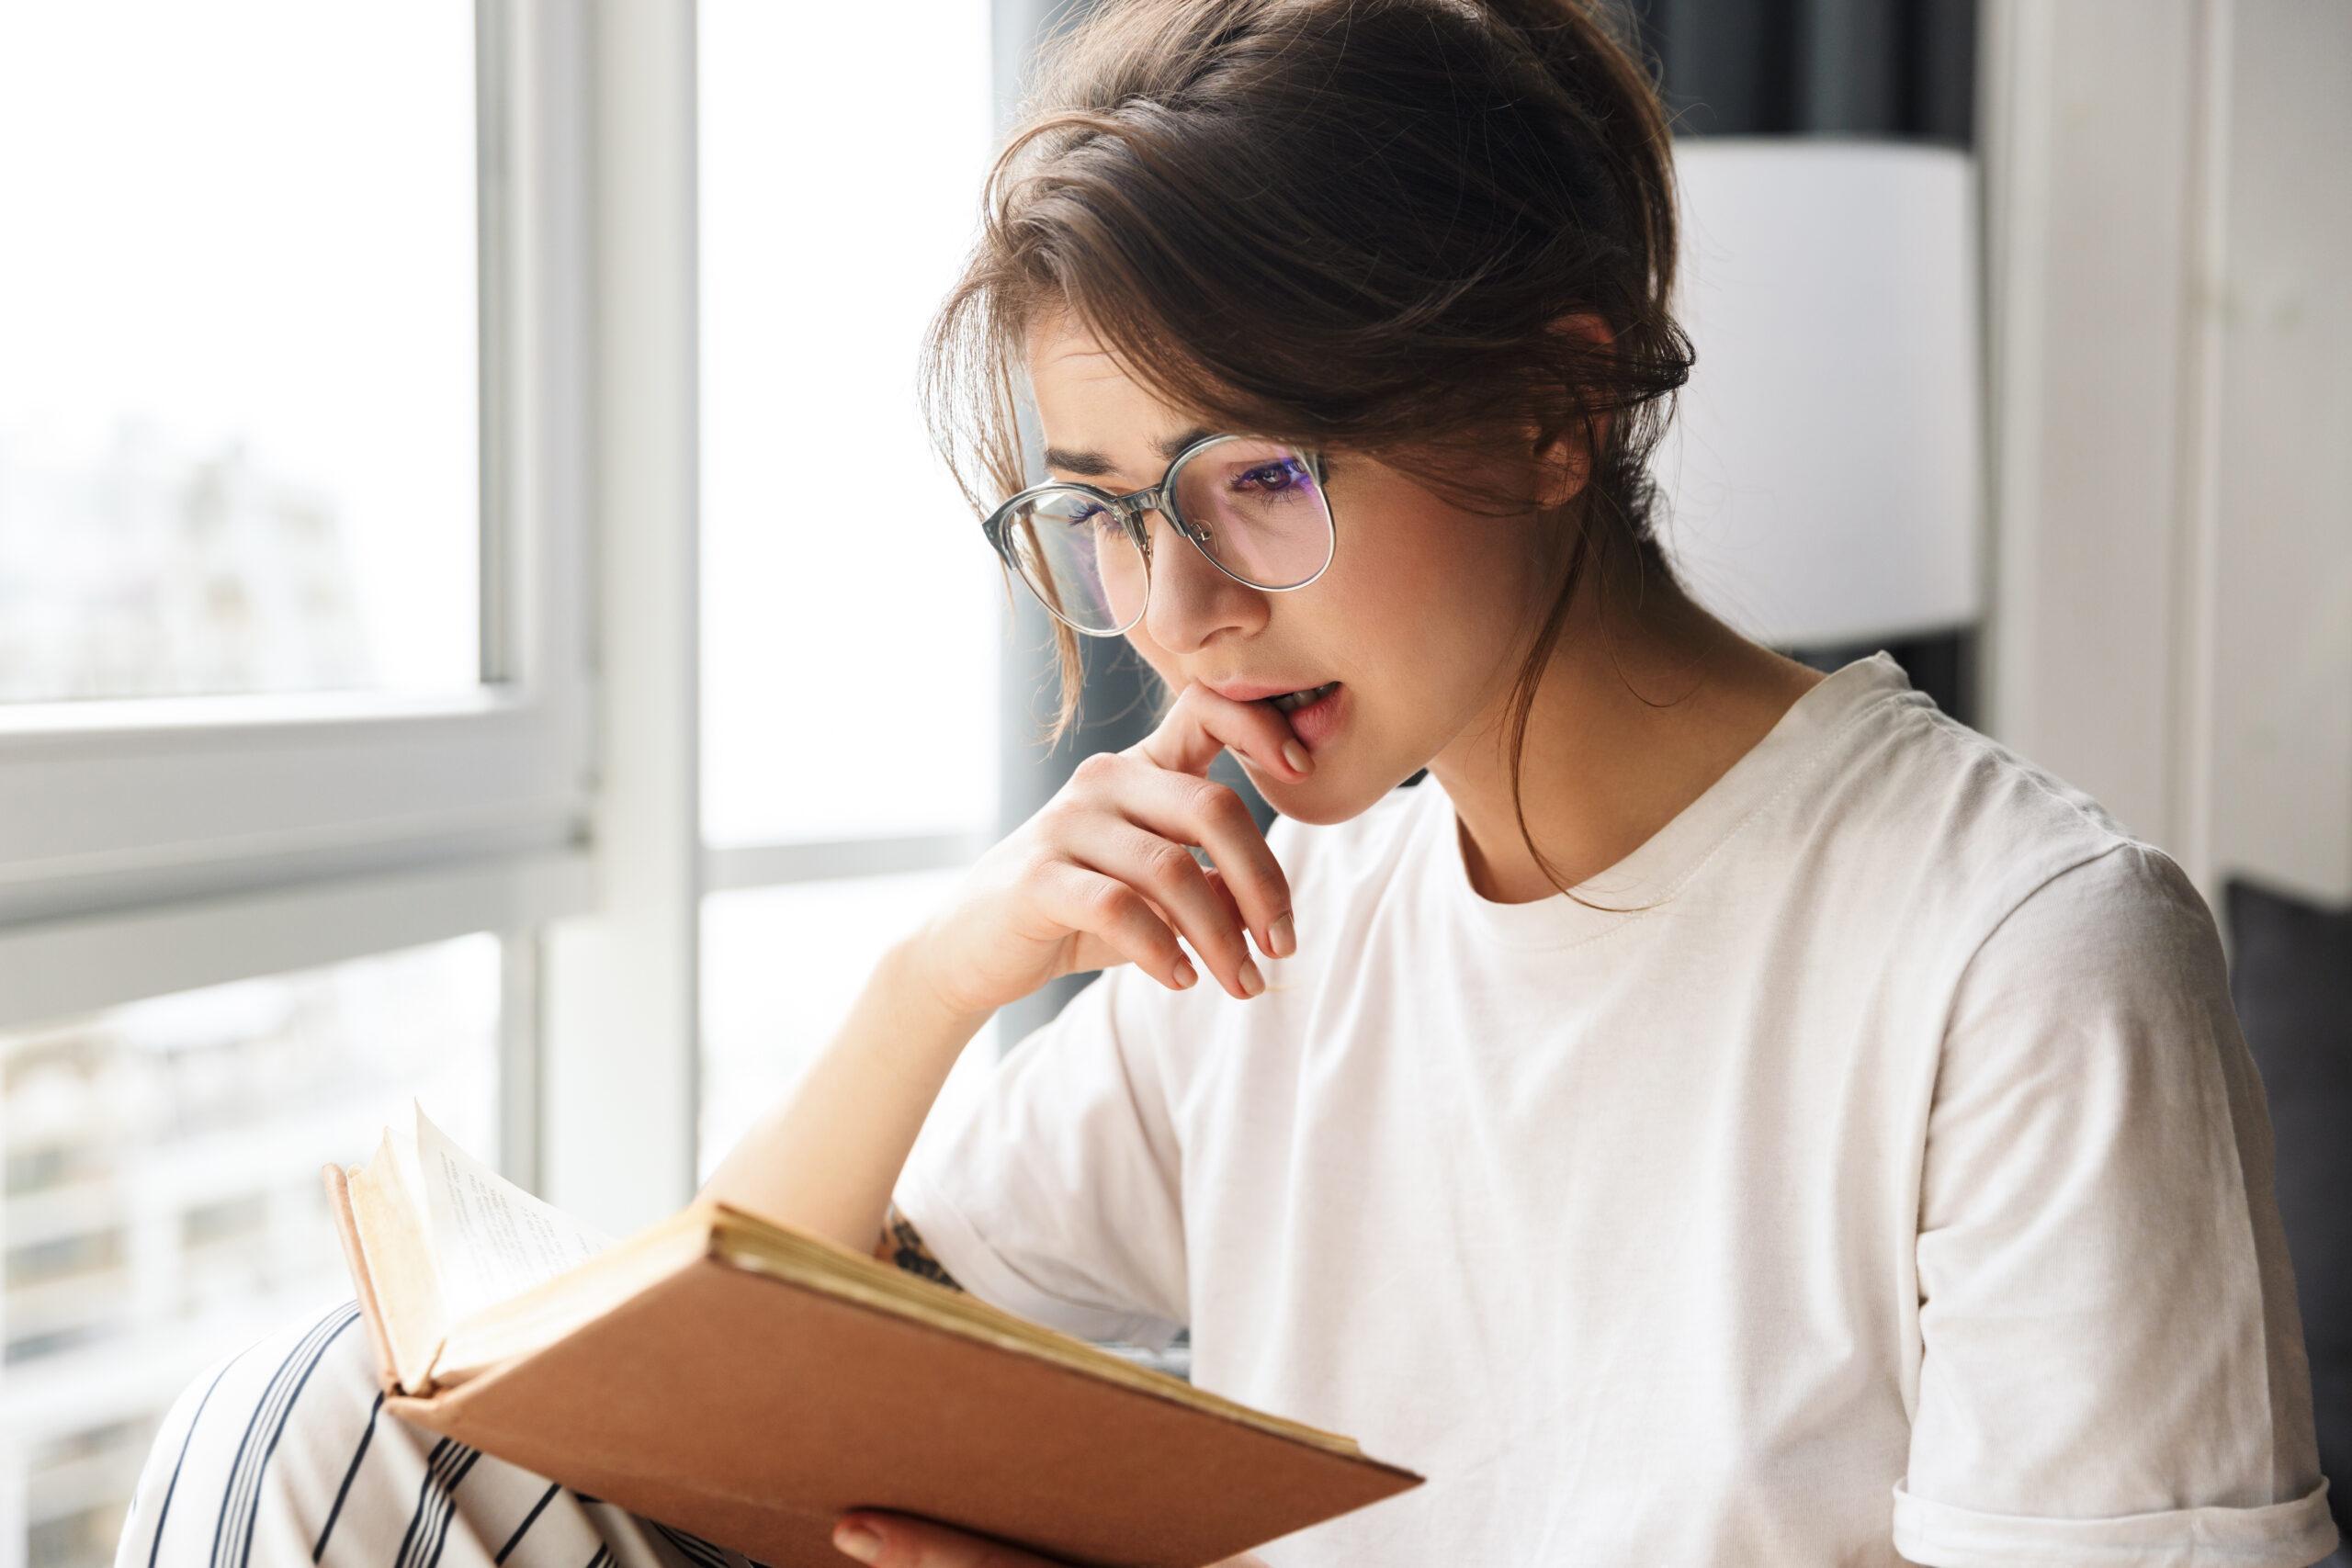 Young woman in eyewear visibly moved by what she is reading